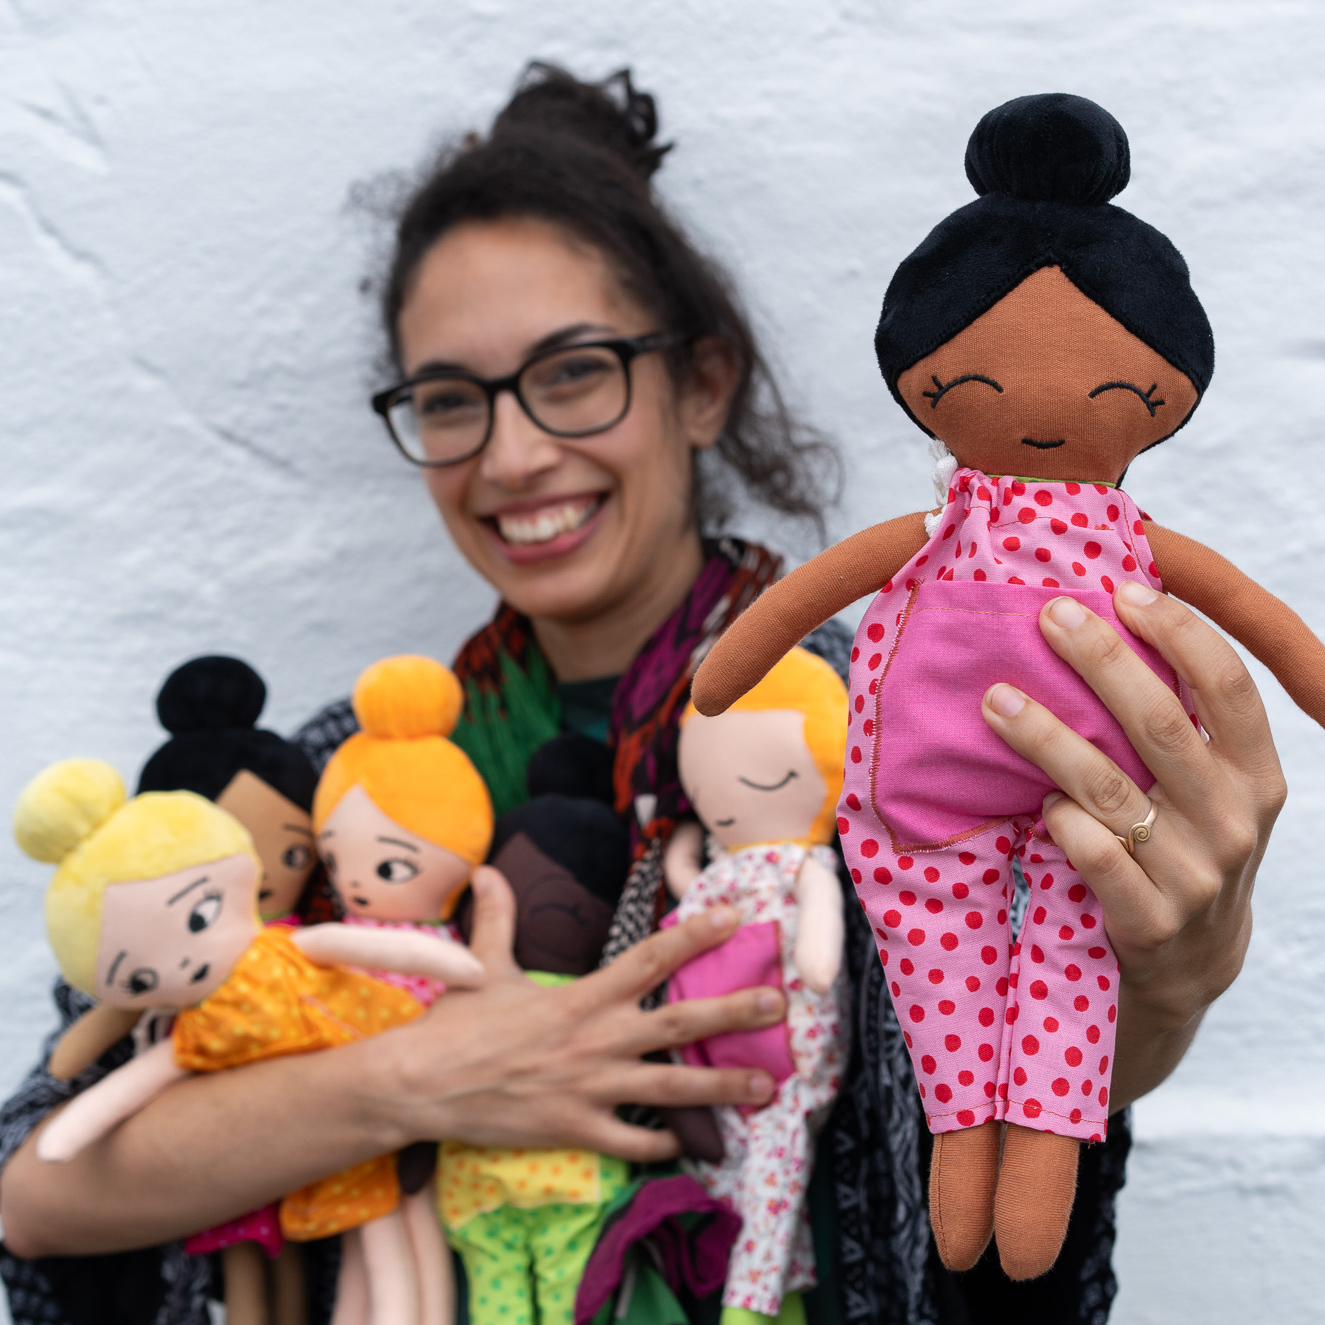 Inclusive dolls for kids